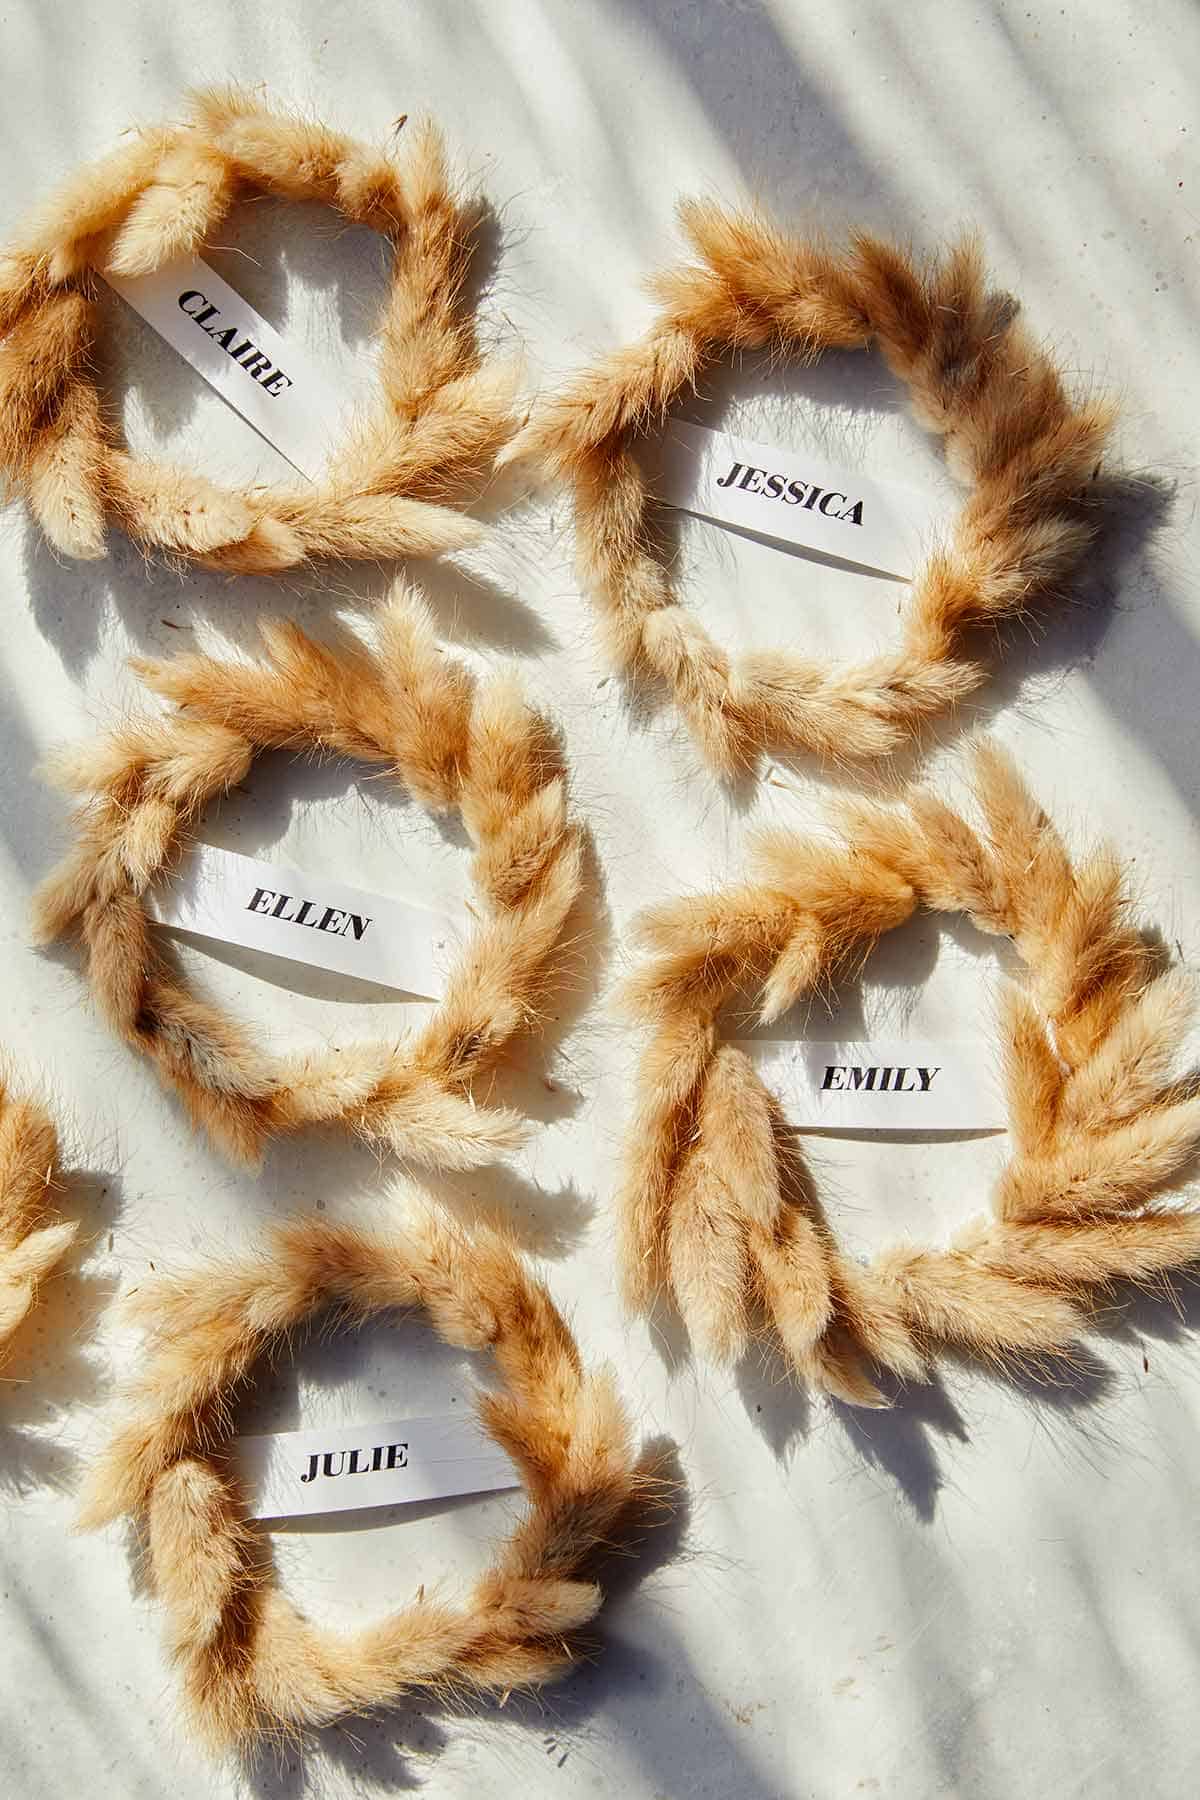 Mini Wreath Place Cards laid out on a surface. 